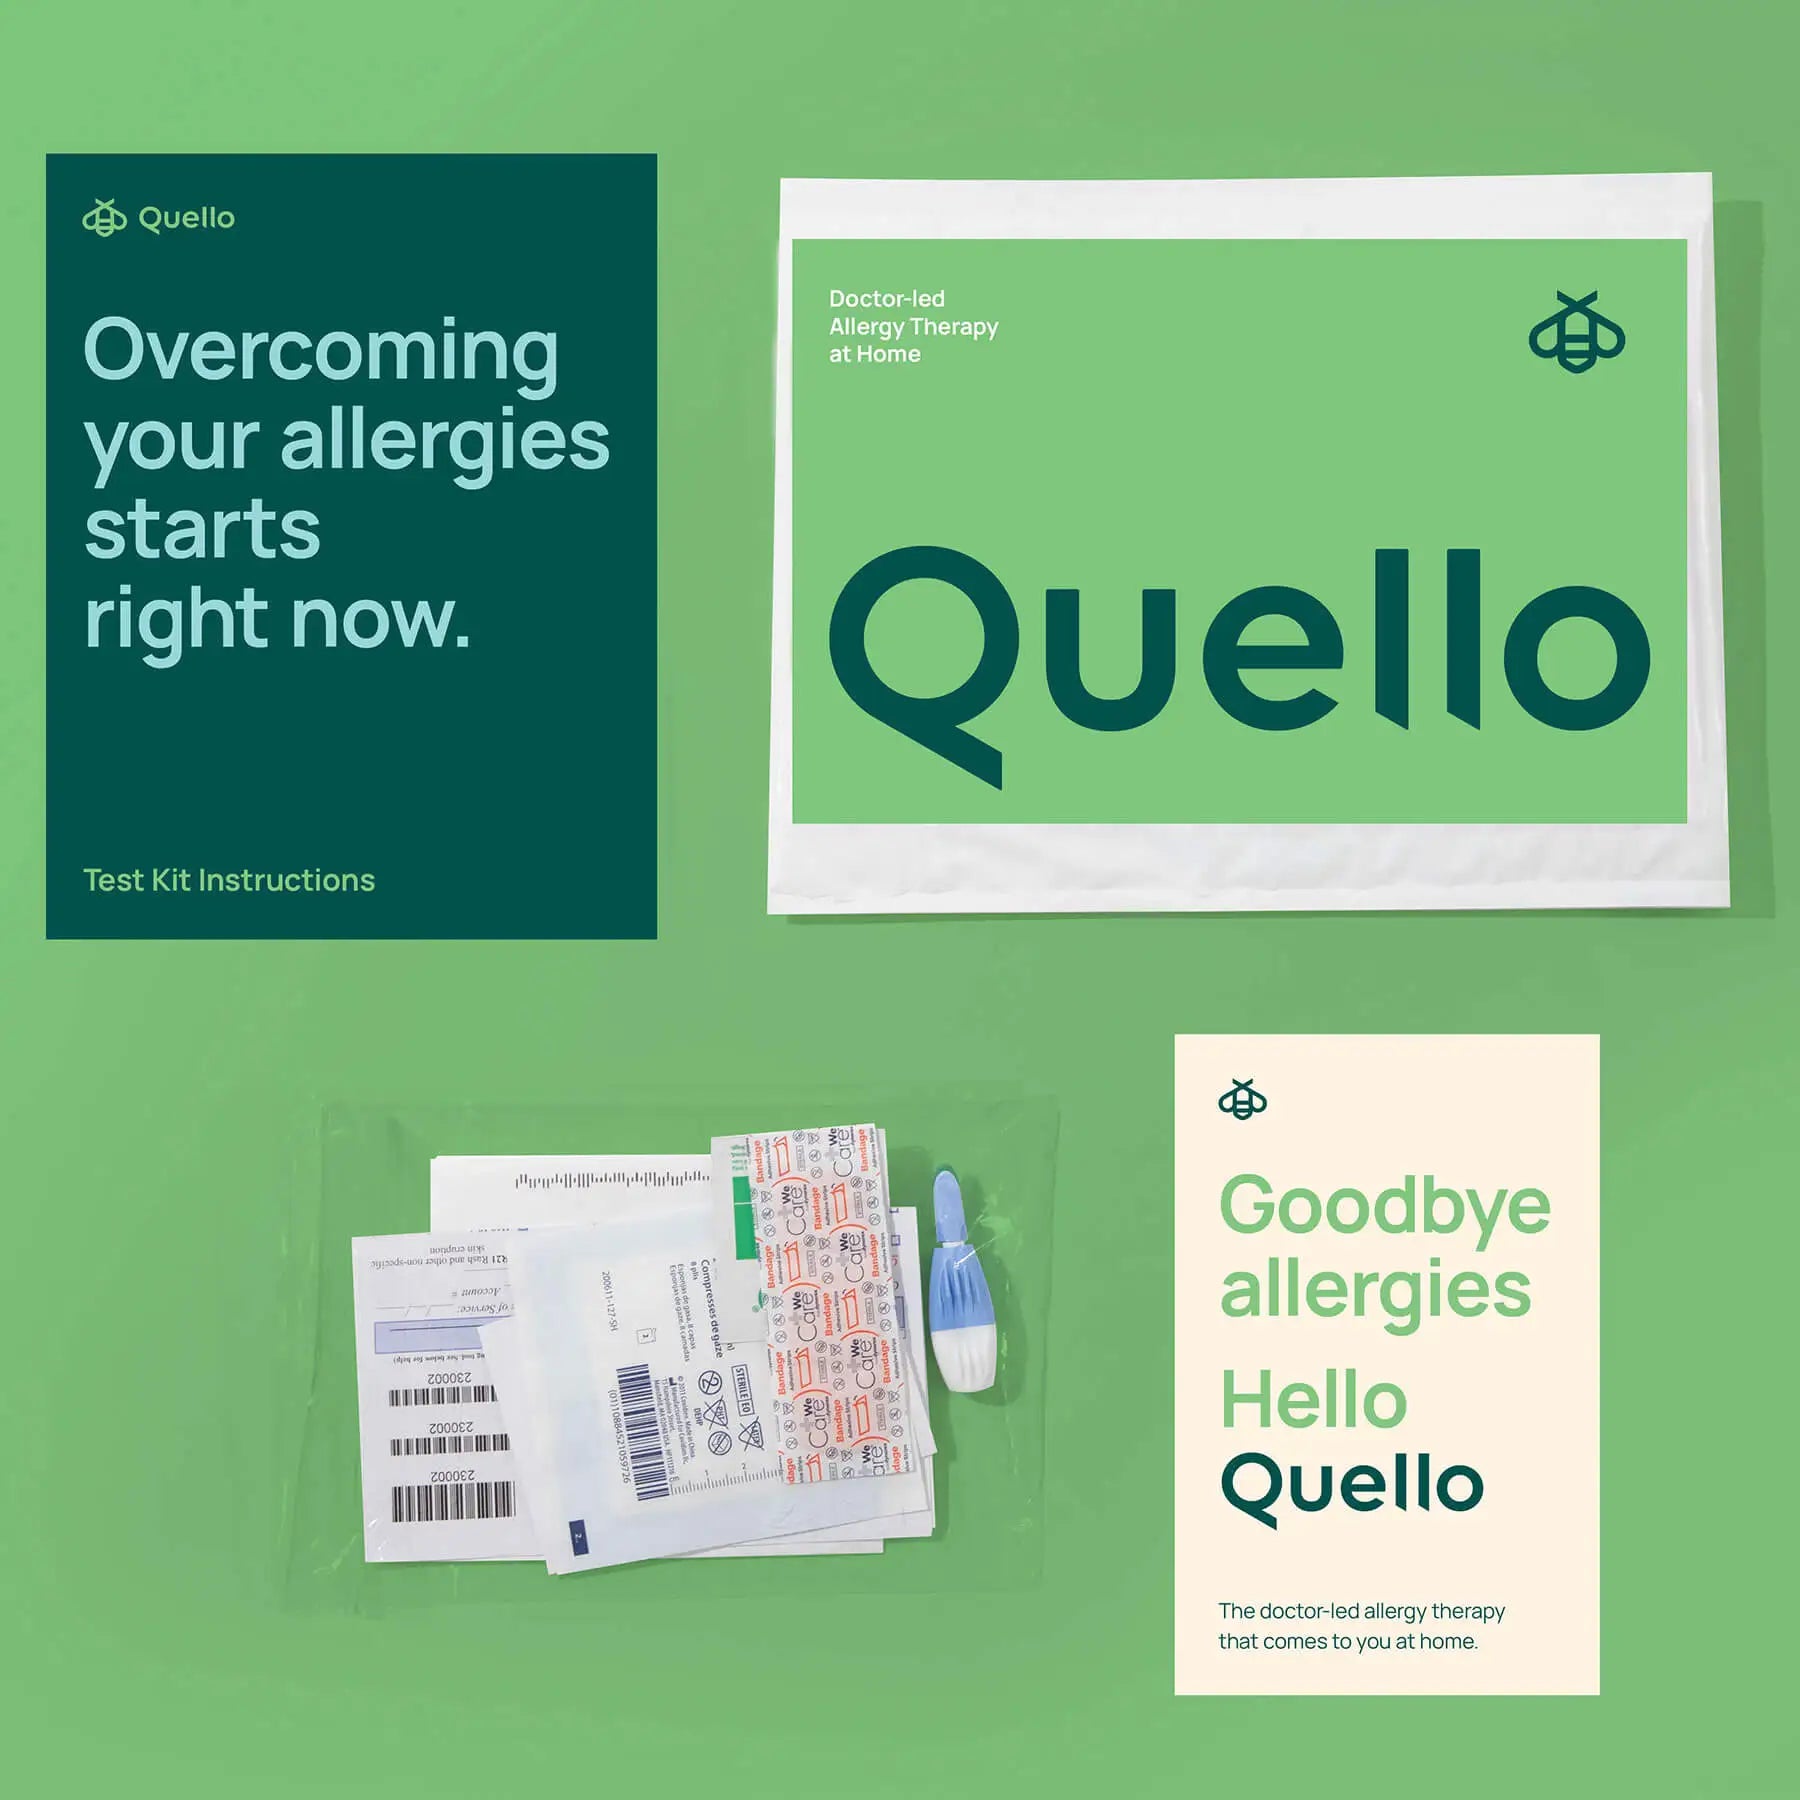 Image of the Quello Home Allergy Test Kit, showing the packaging and materials.